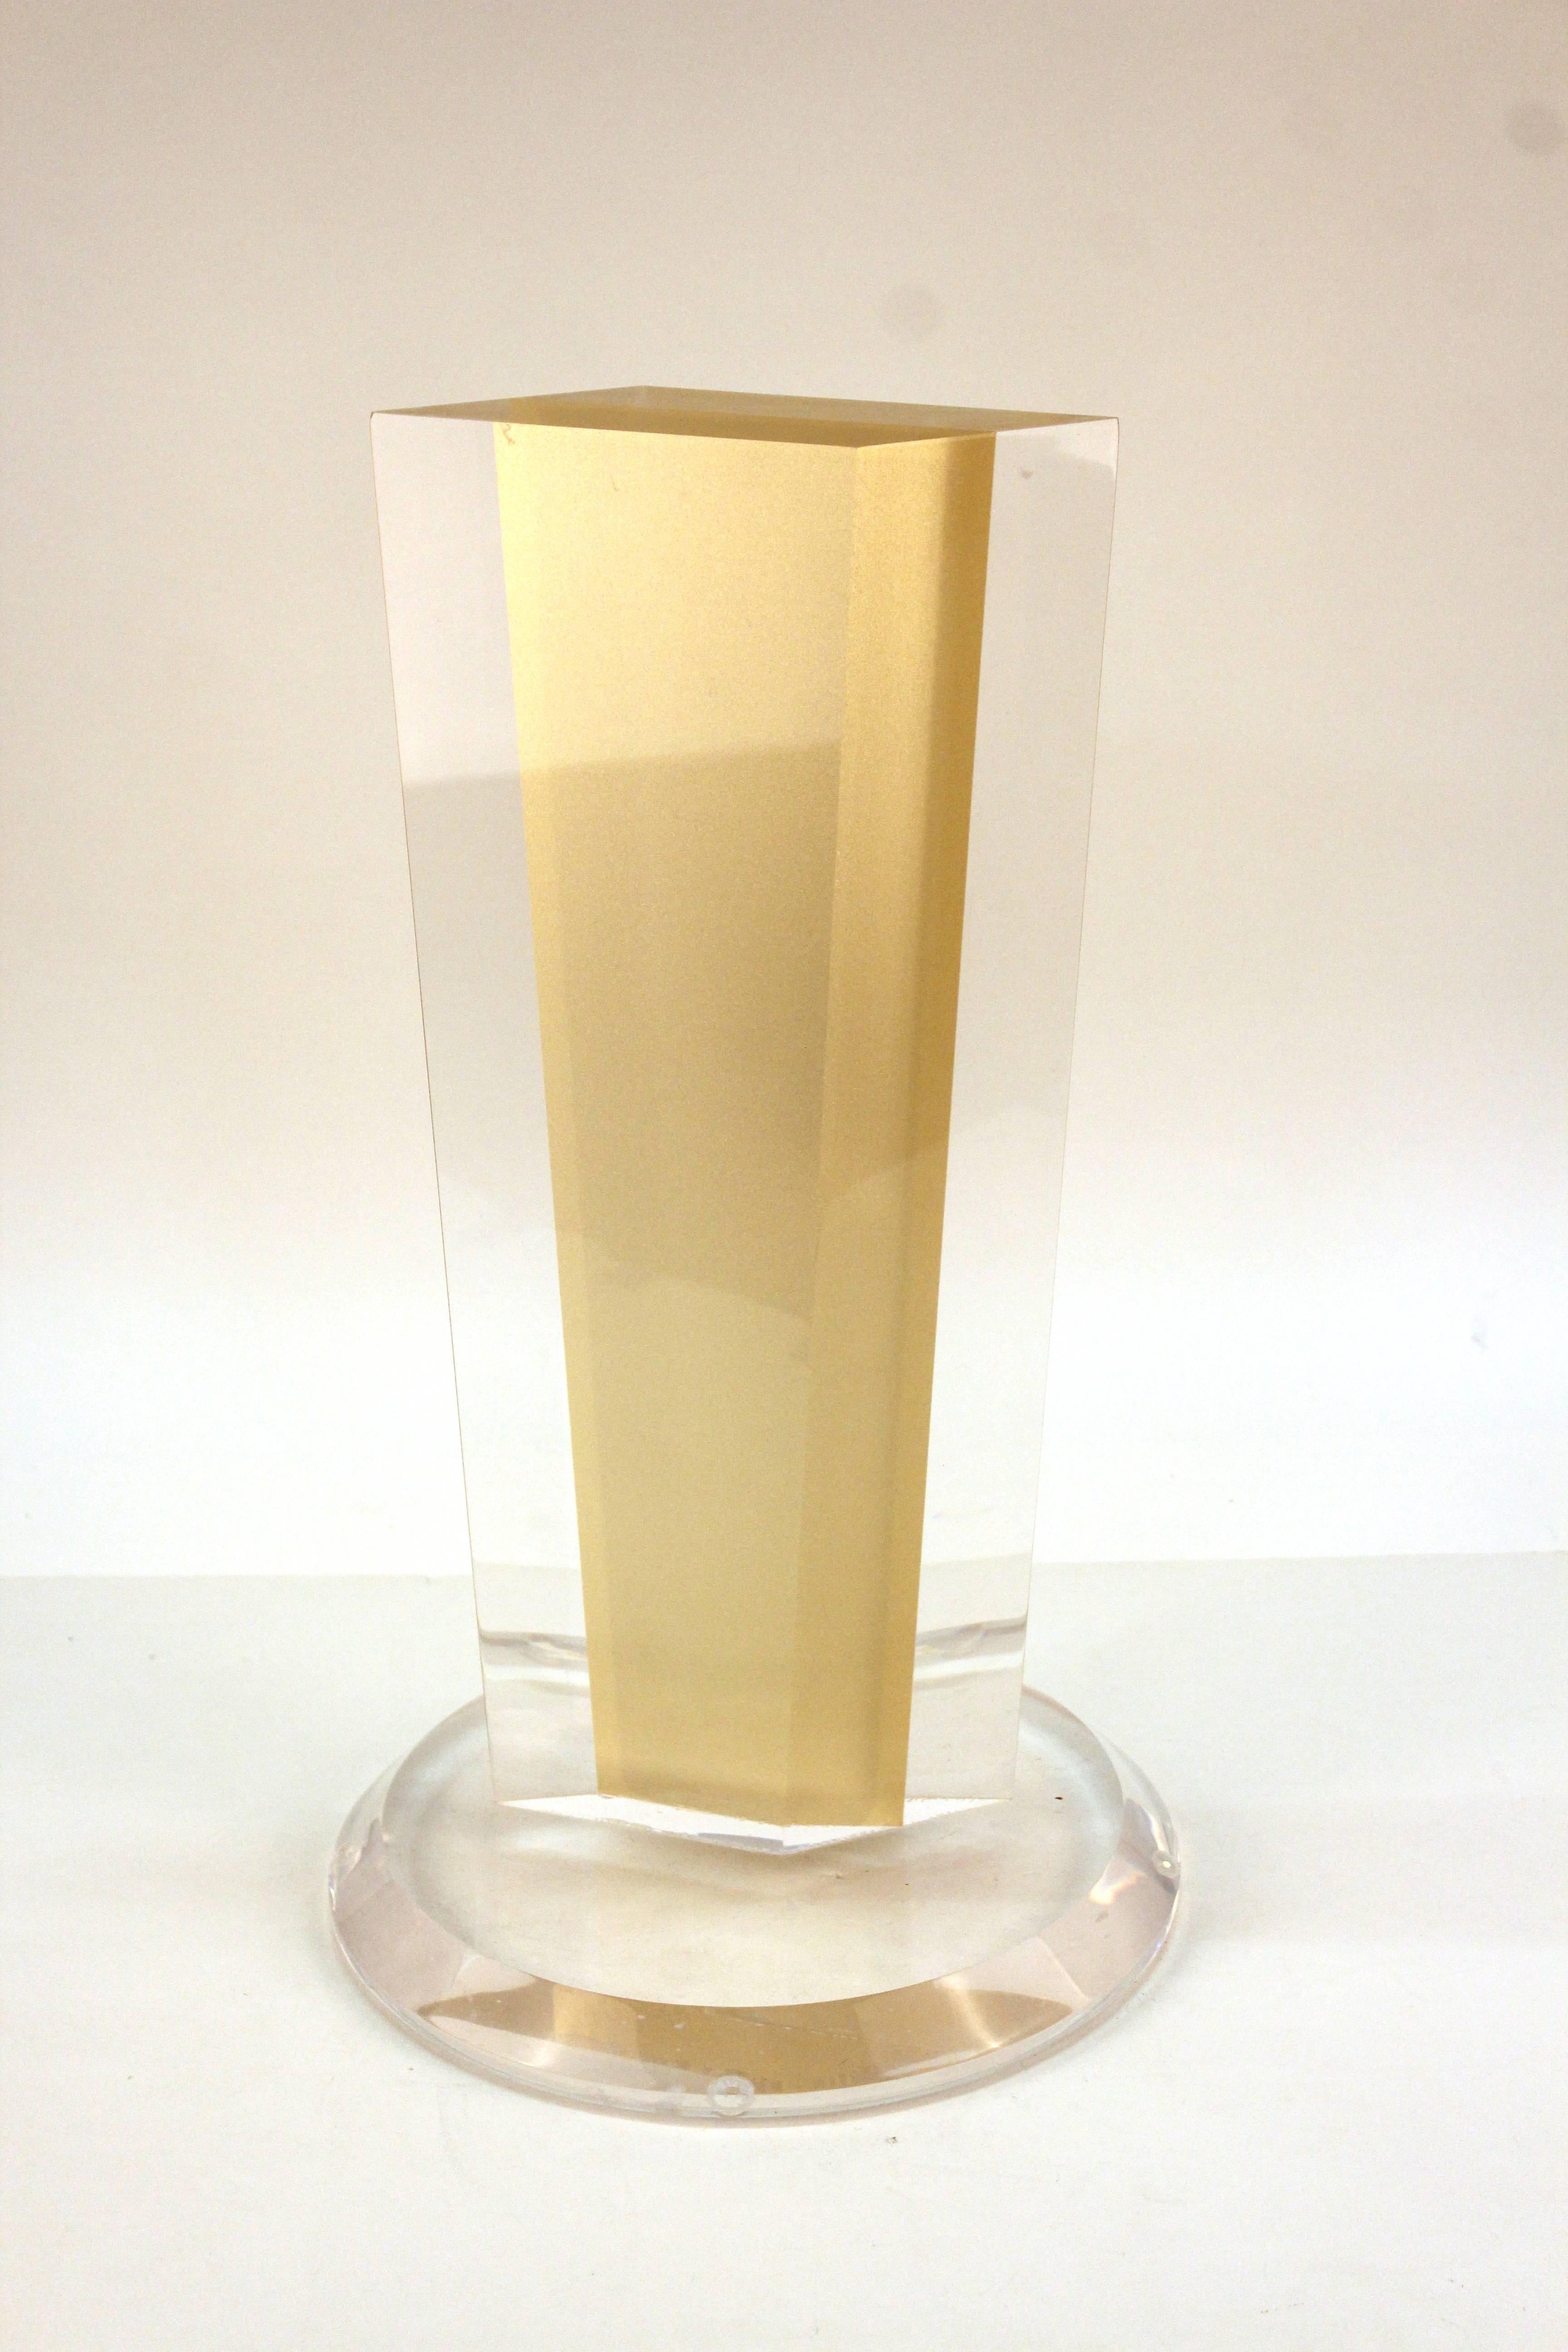 A long Lucite sculpture on circular base. Features a tall cream block encased in clear Lucite shaped in a off-kilter rectangle. Wear consistent with use and material. The piece is in good condition.